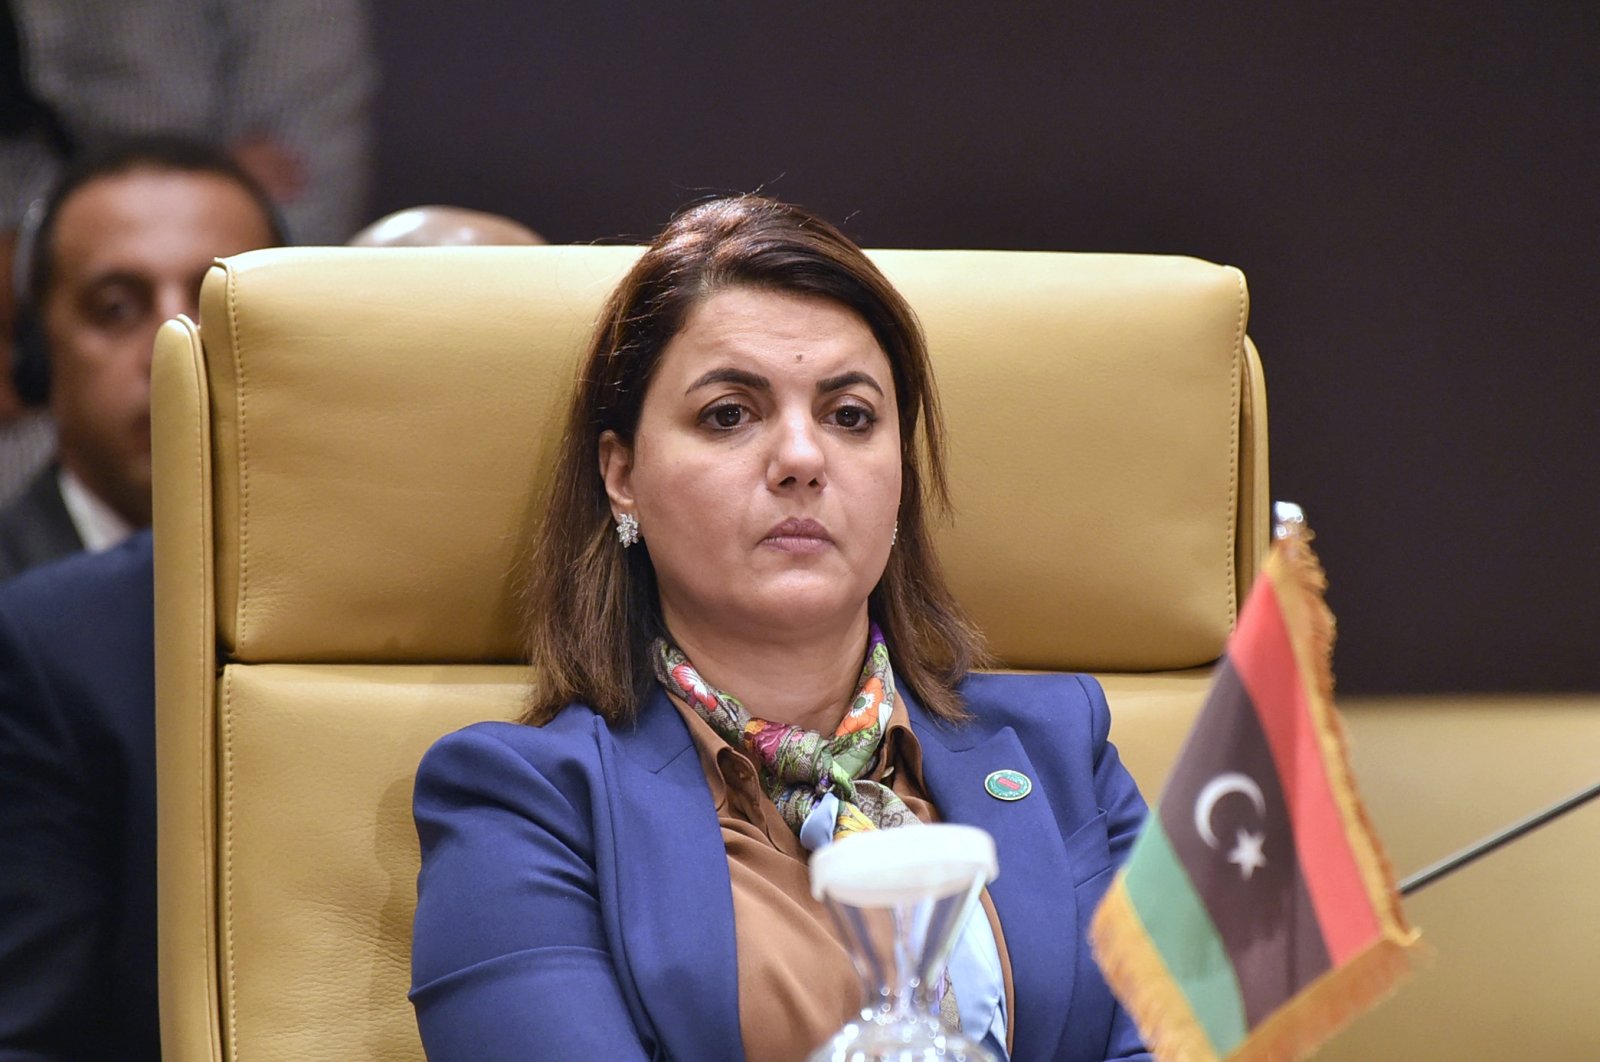 Libya's Foreign Minister Najla Mangoush attends a meeting of Libya's neighbors as part of international efforts to reach a political settlement to the country's conflict, in Algiers, Algeria, Aug. 30, 2021. (Ryad Kramdi / AFP)